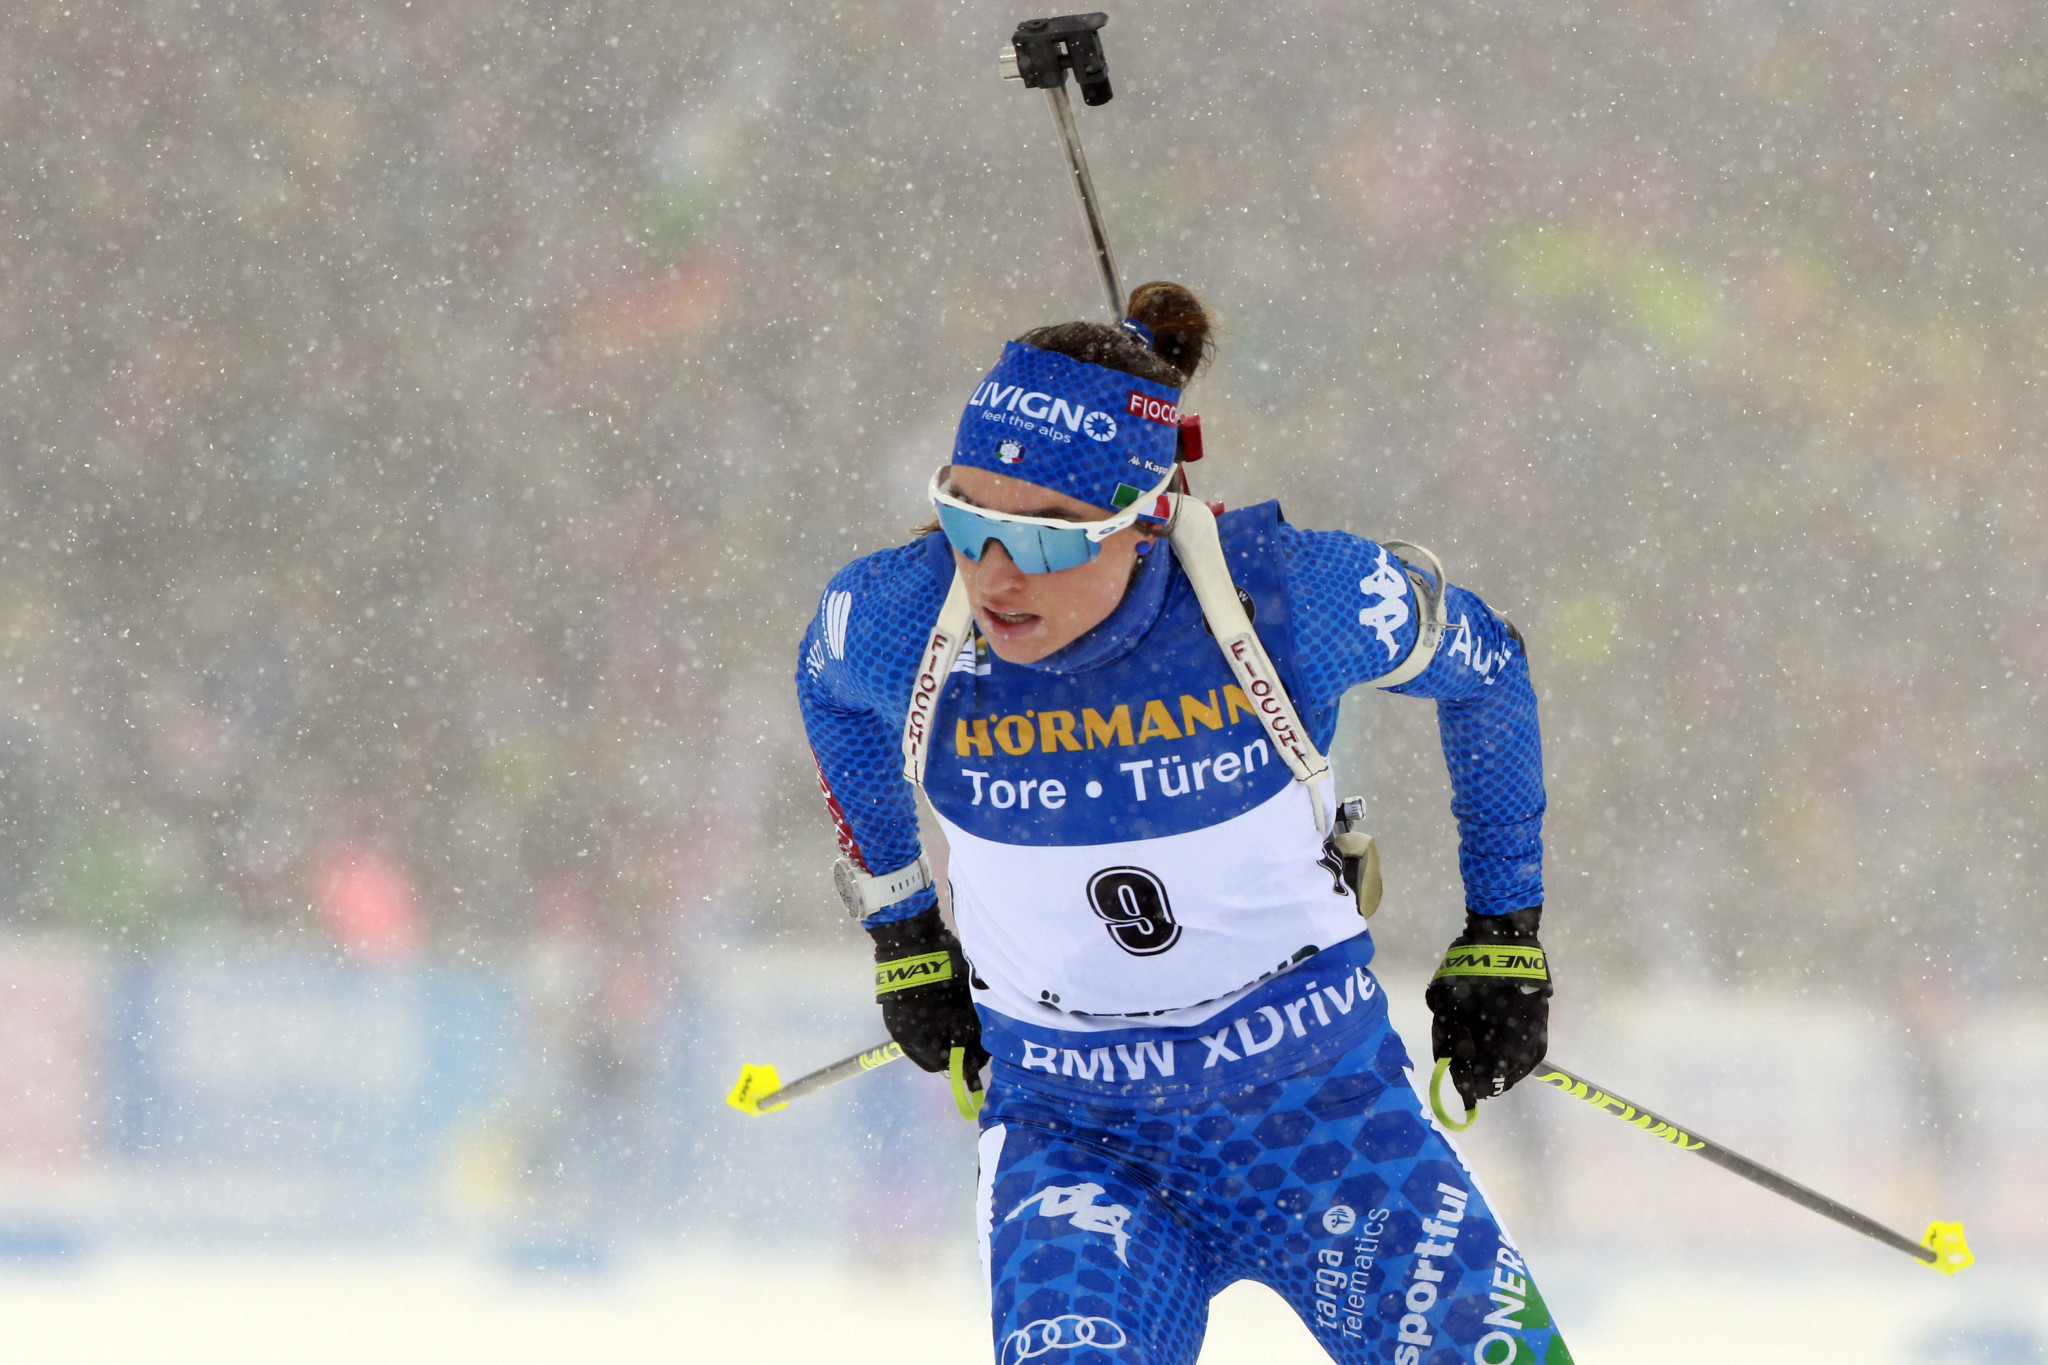 Dorothea Wierer will defend her overall women's crown ©Getty Images